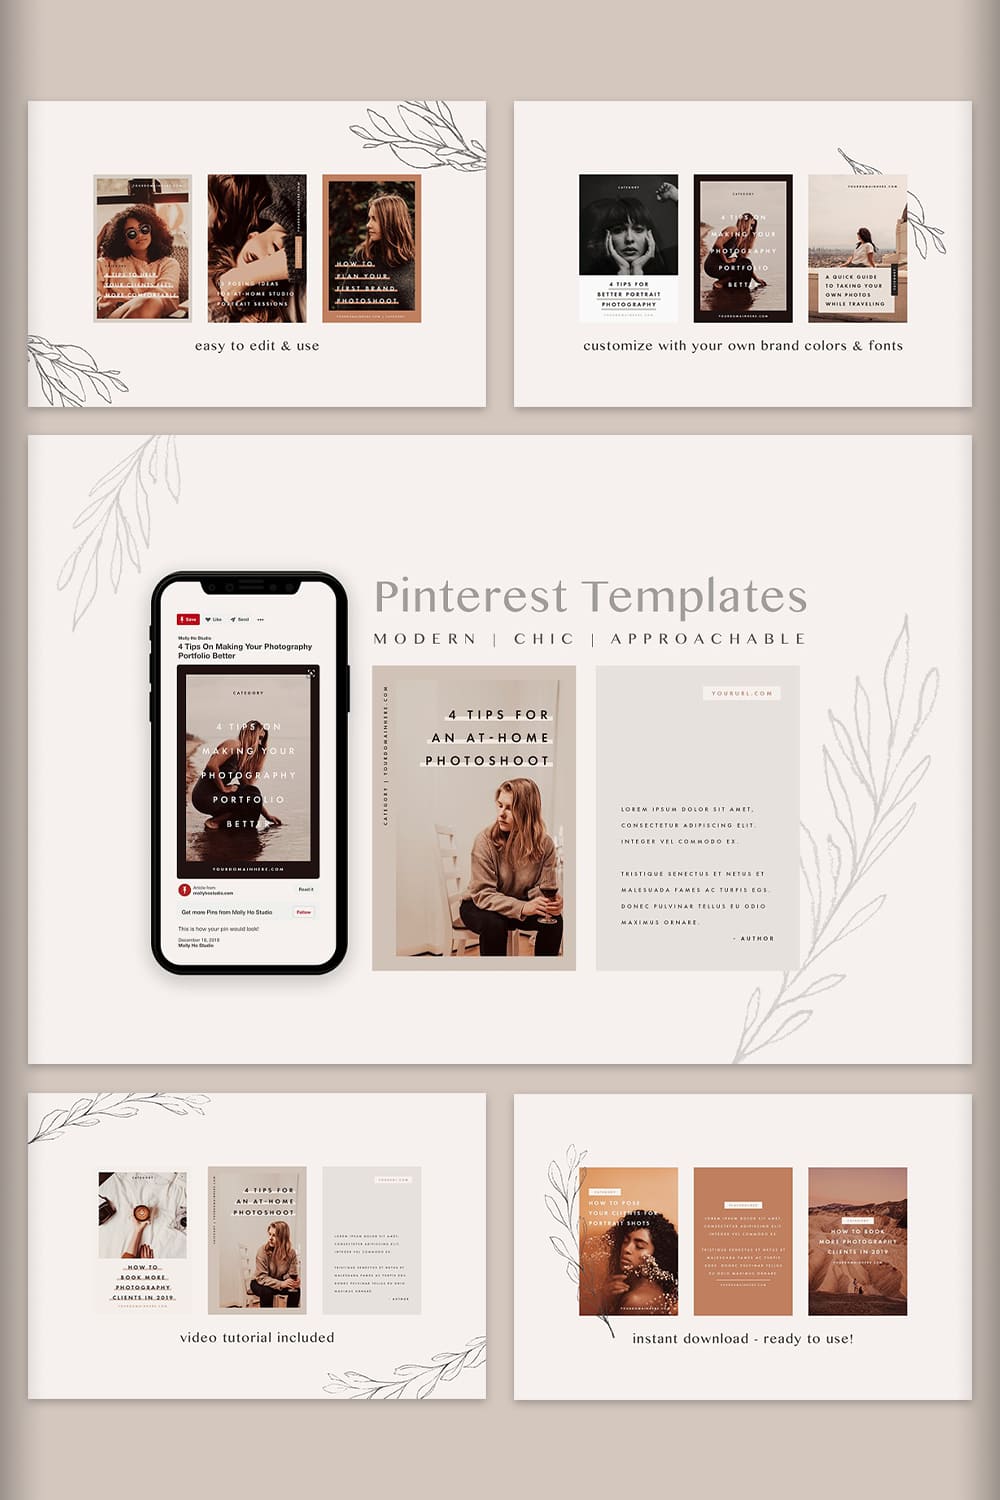 Pinterest Templates -"Easy To Edit & Use".